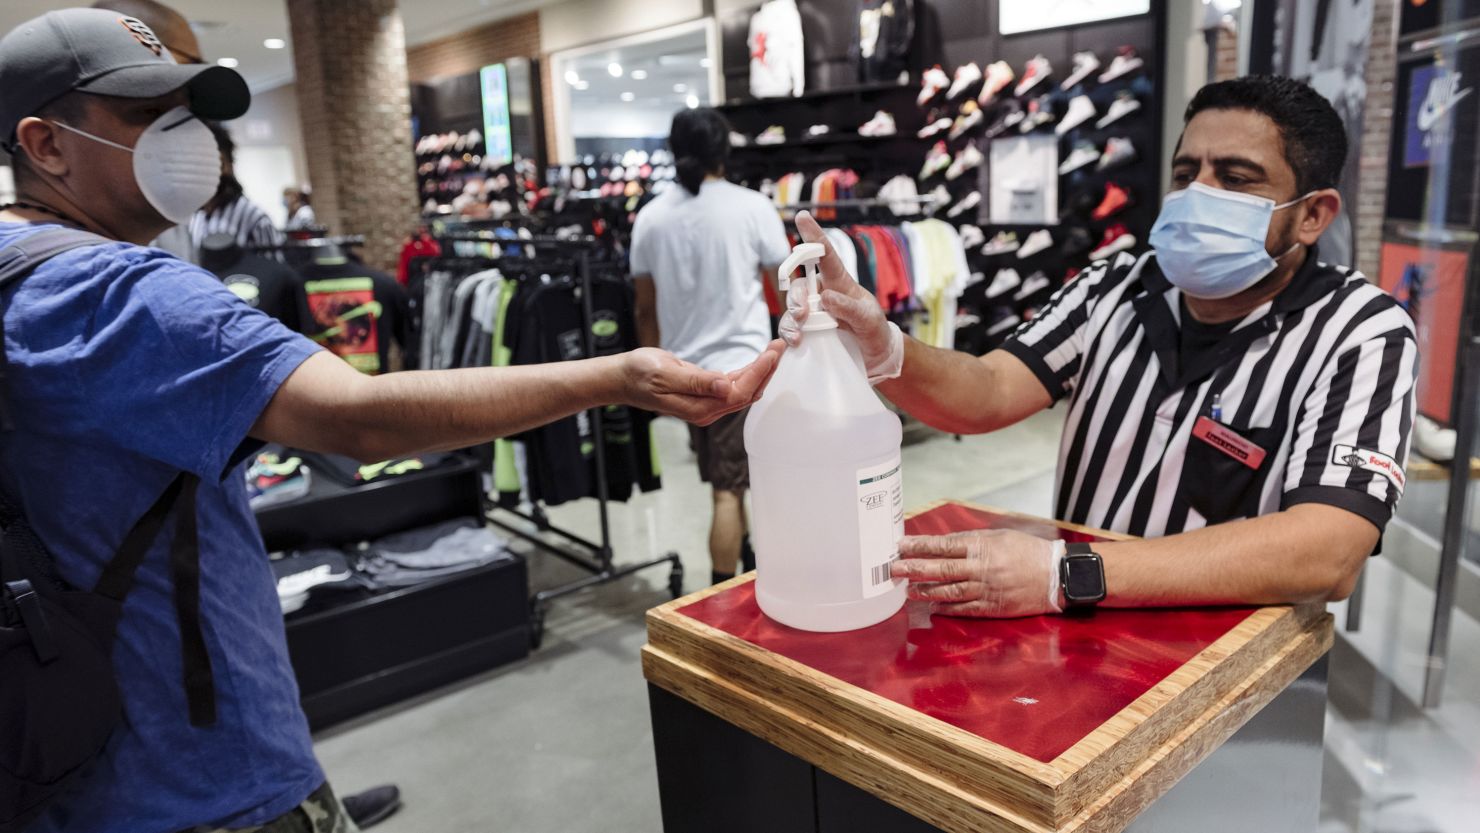 A worker in a protective mask at the entrance to a Foot Locker store in San Francisco, California, gives a shopper hand sanitizer on Thursday.